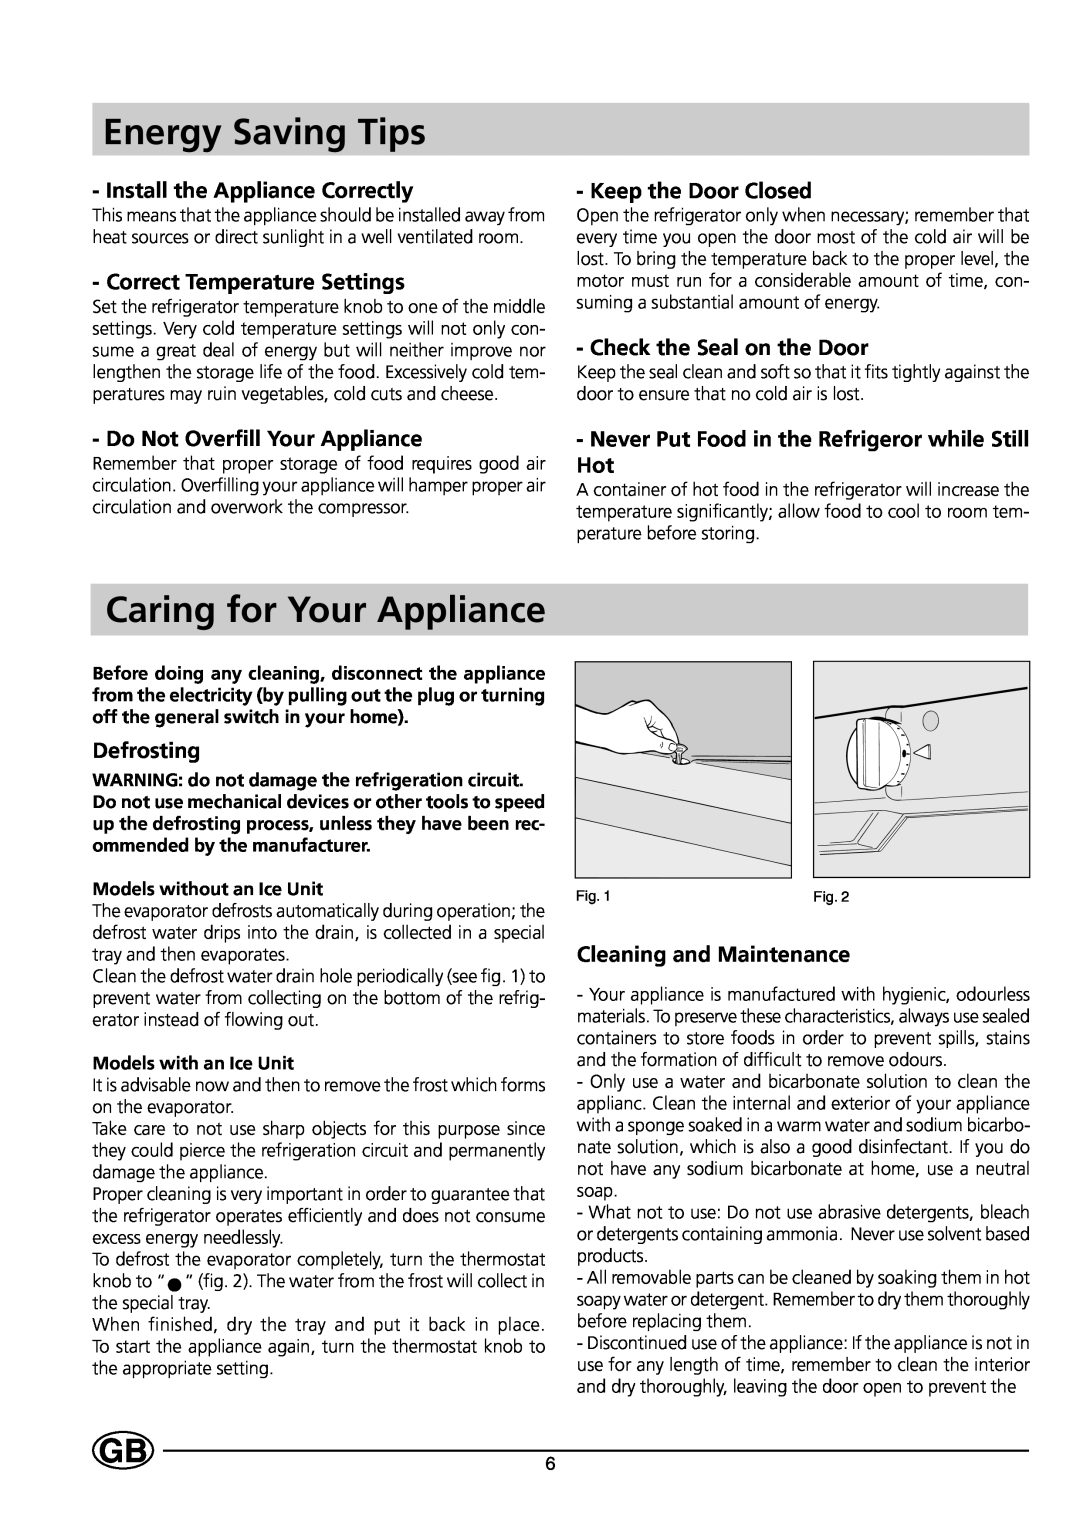 Indesit GSE 160 UK Energy Saving Tips, Caring for Your Appliance, Install the Appliance Correctly, Keep the Door Closed 